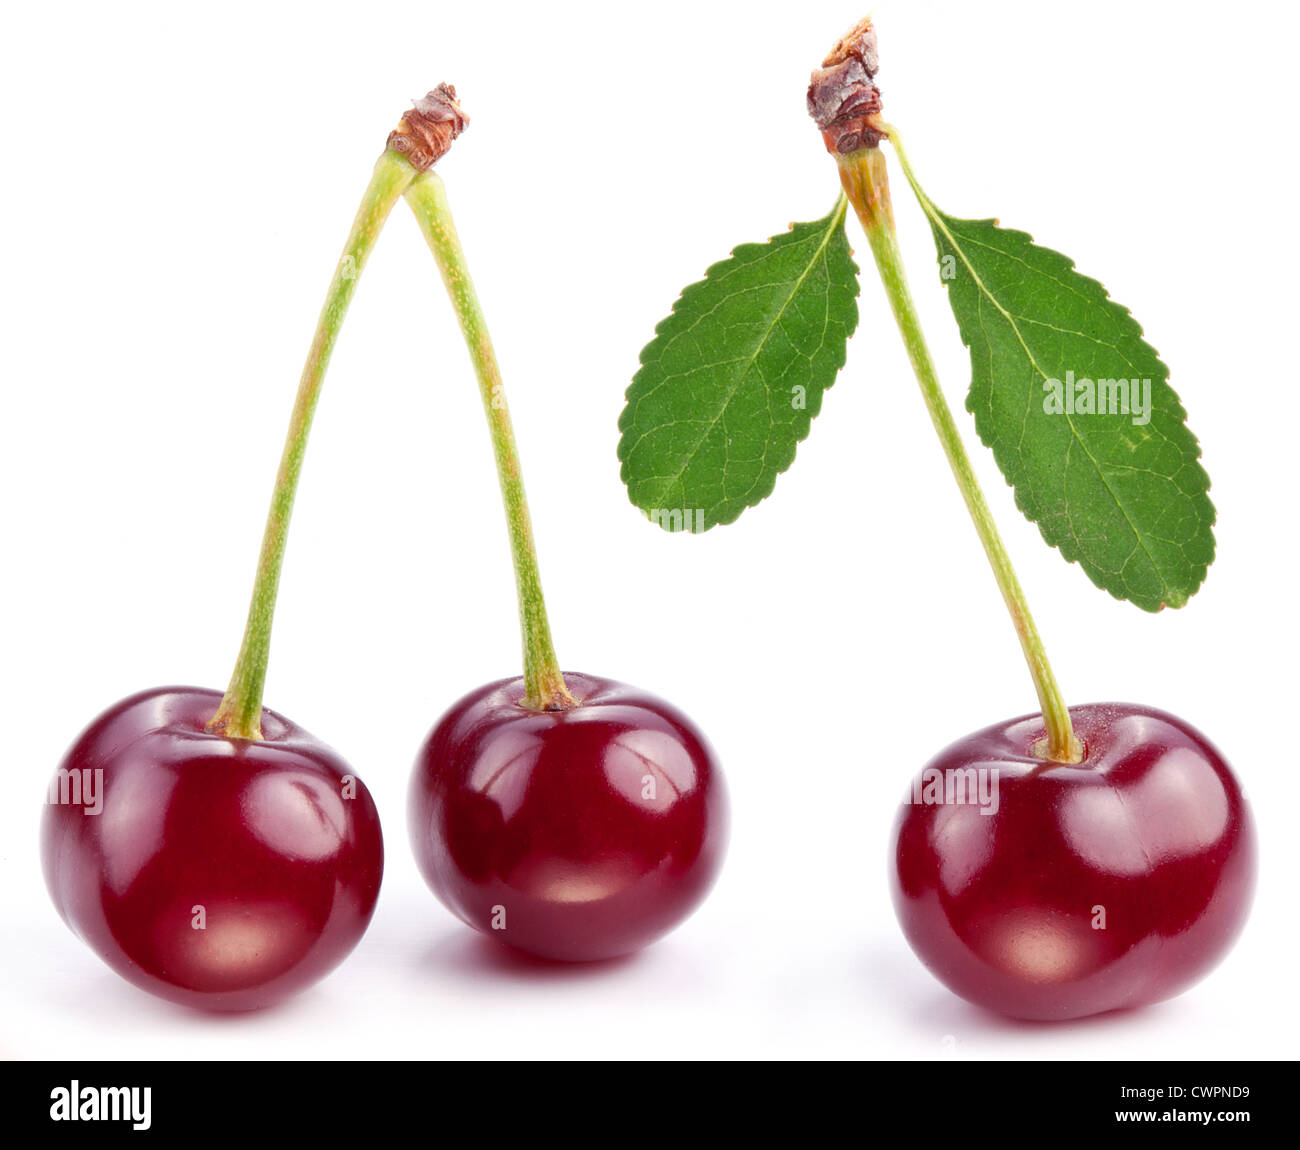 Cherries with leaves on a white background. Stock Photo